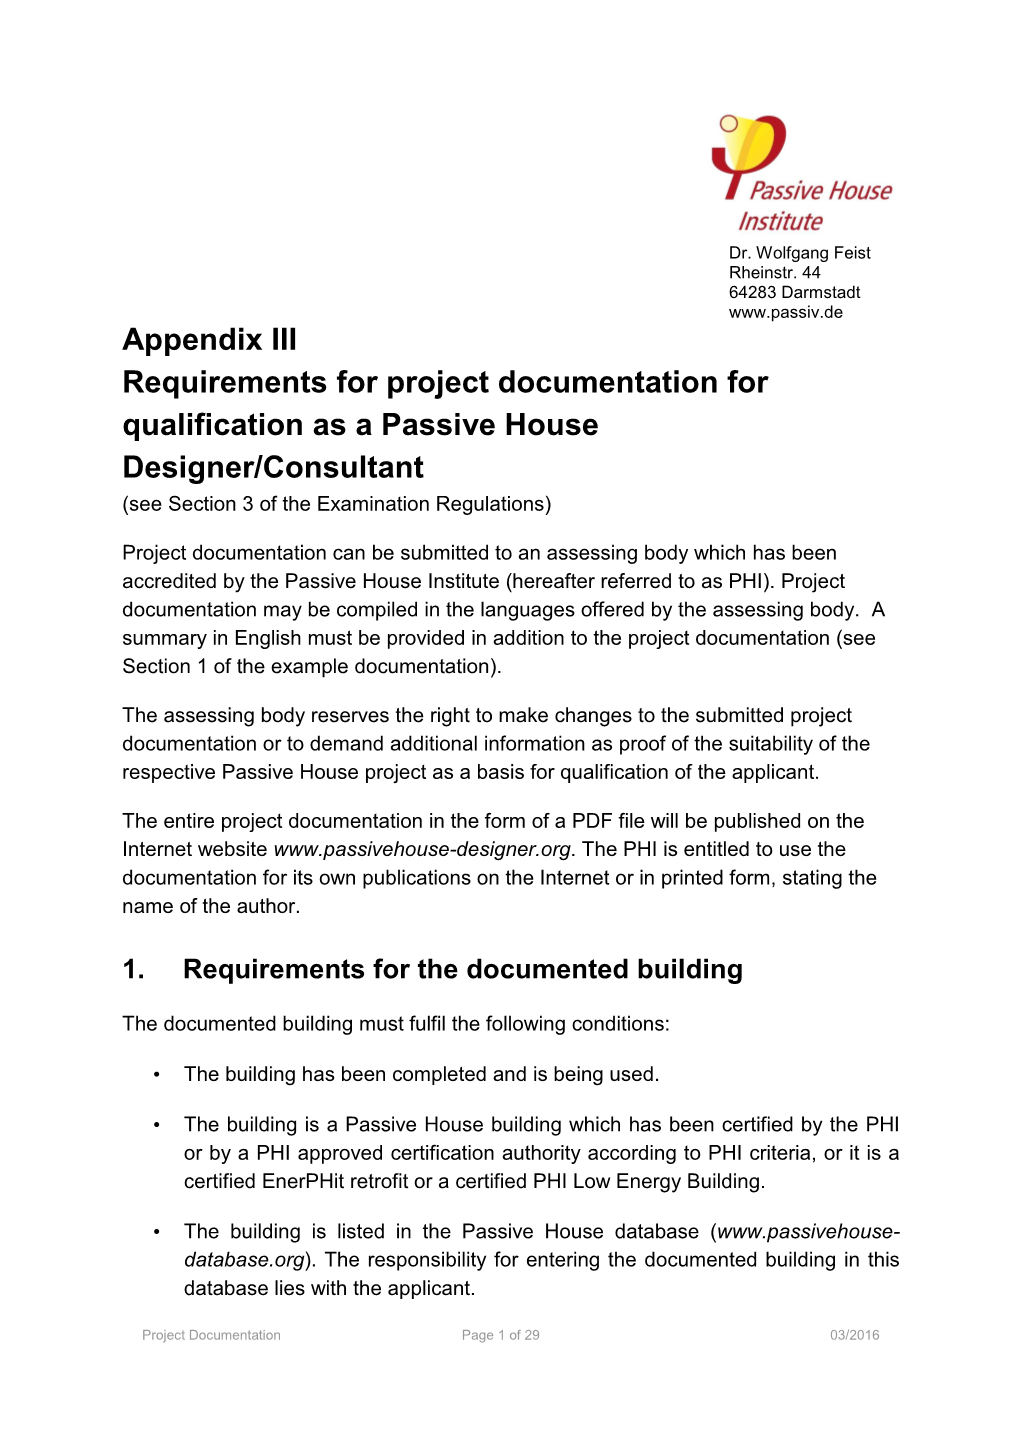 Appendix III: Requirements for Project Documentation